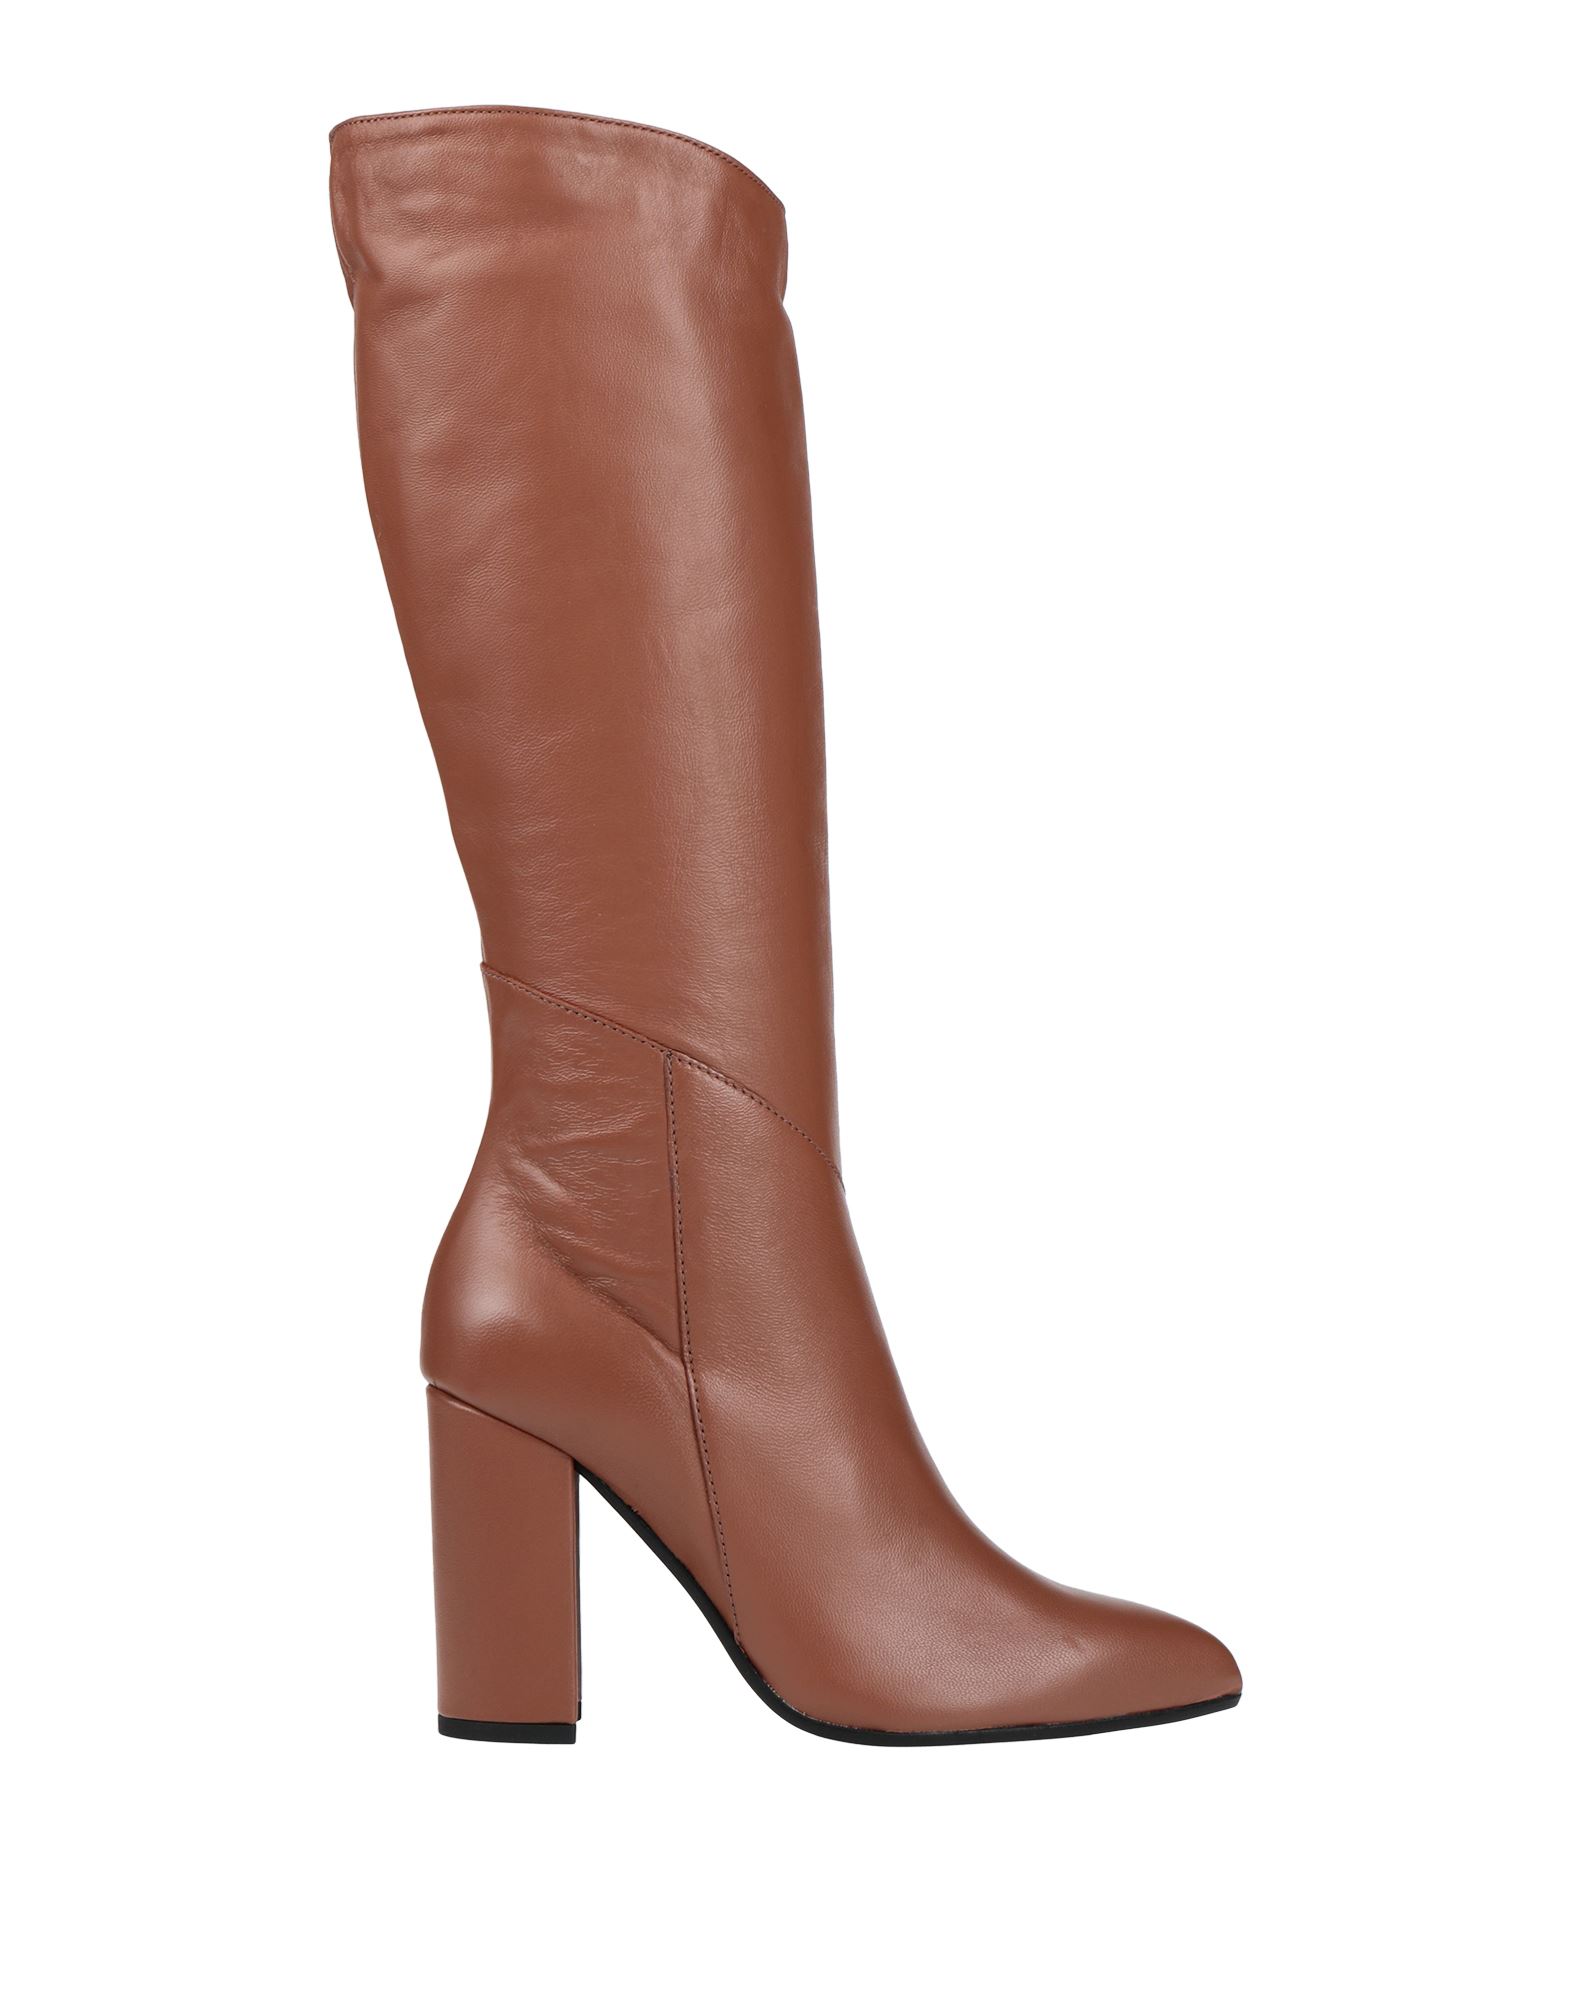 FORMENTINI KNEE BOOTS